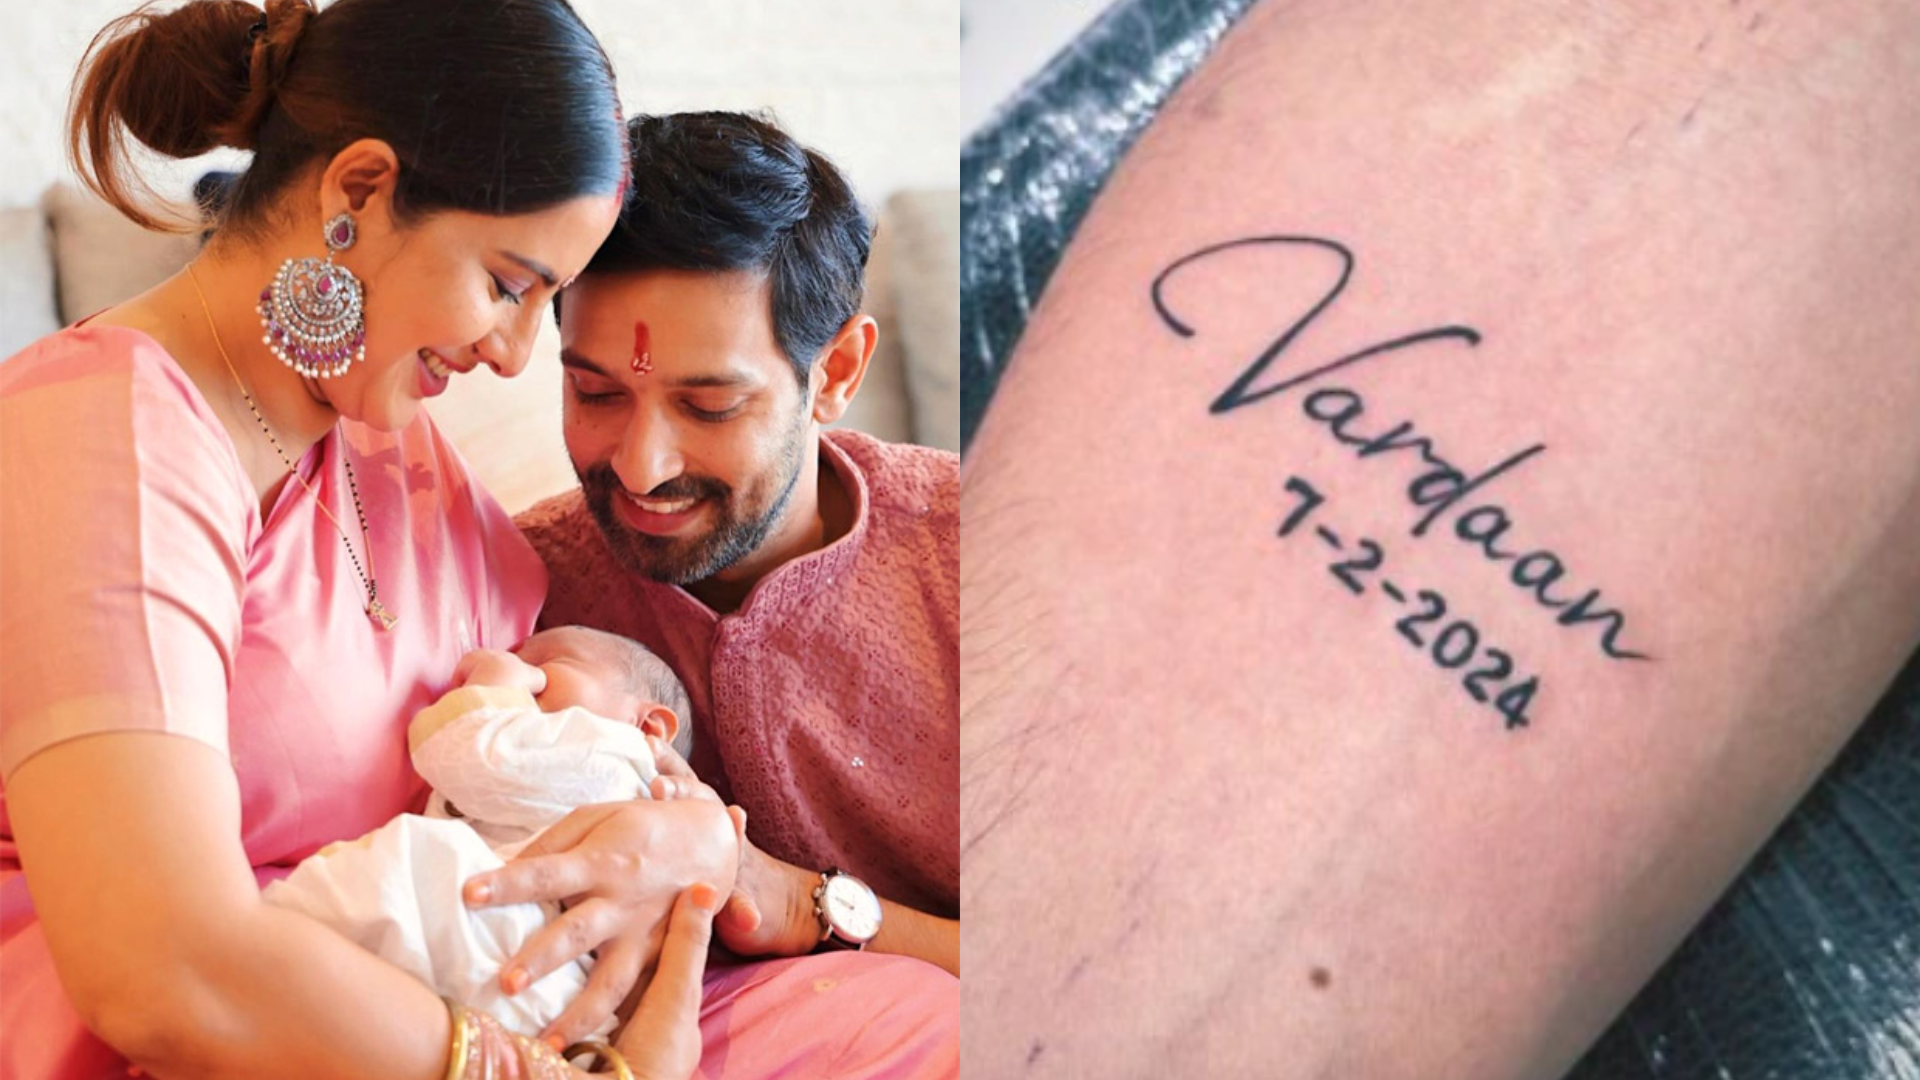 Vikrant Massey Gets A Tattoo Of His Newborn Son Vardaan’s Name And DOB: “Addition Or Addiction?”